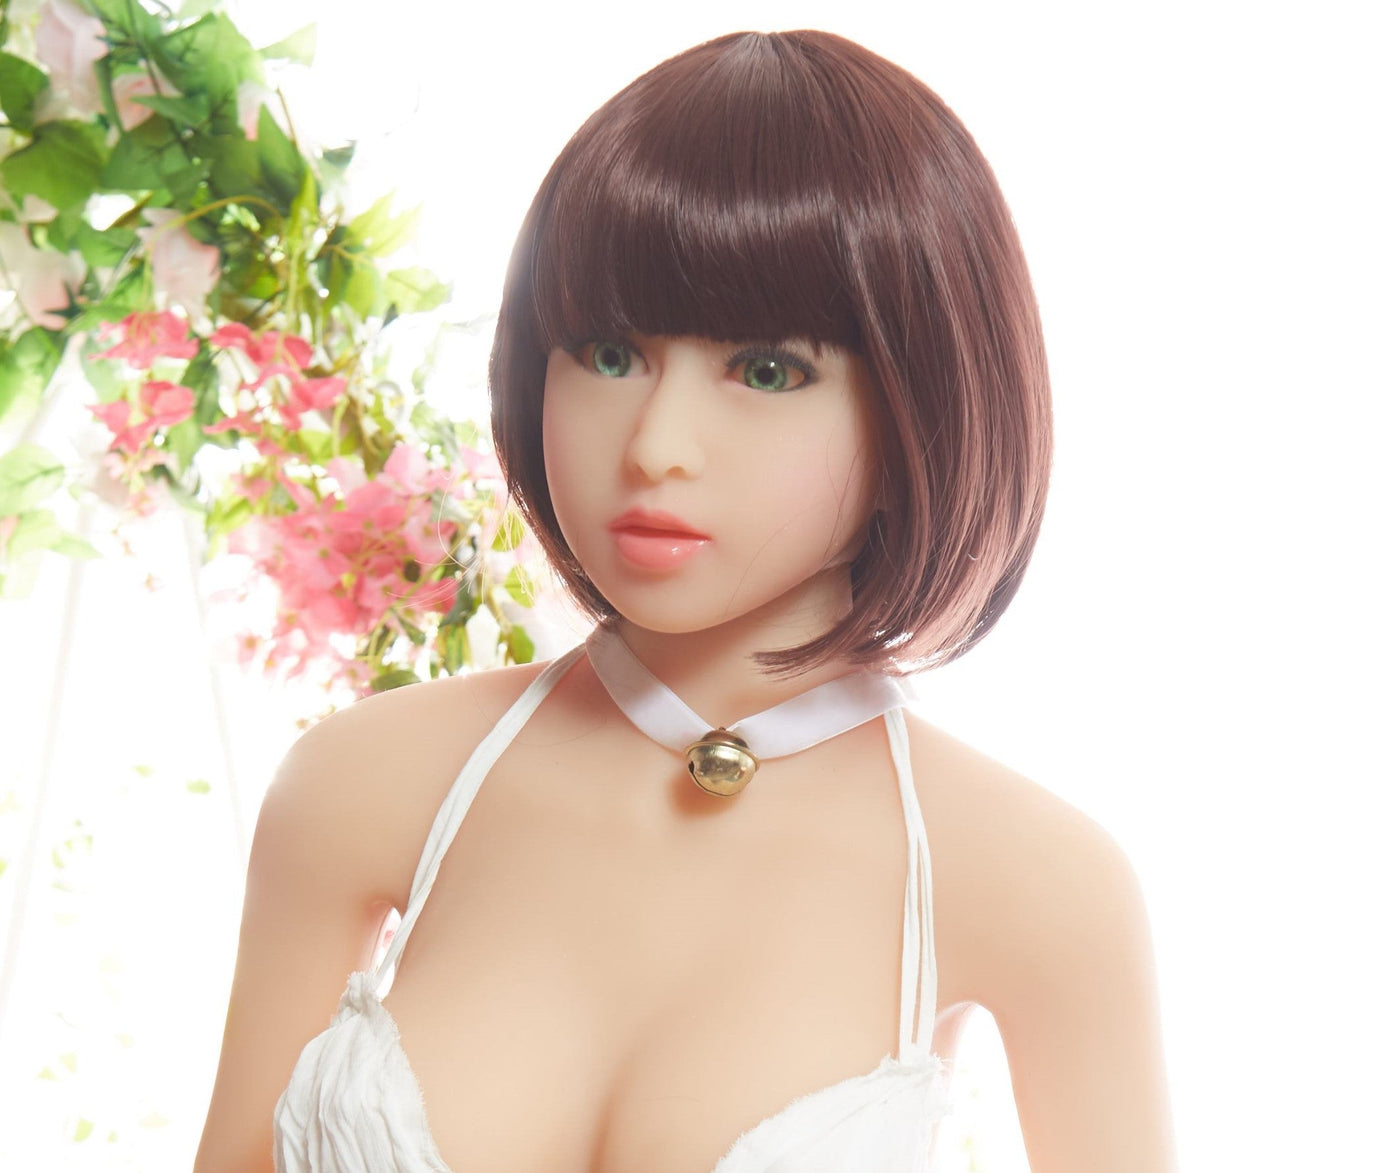 Neodoll Allure Nora - Sex Doll Doll - M16 Compatible - Natural